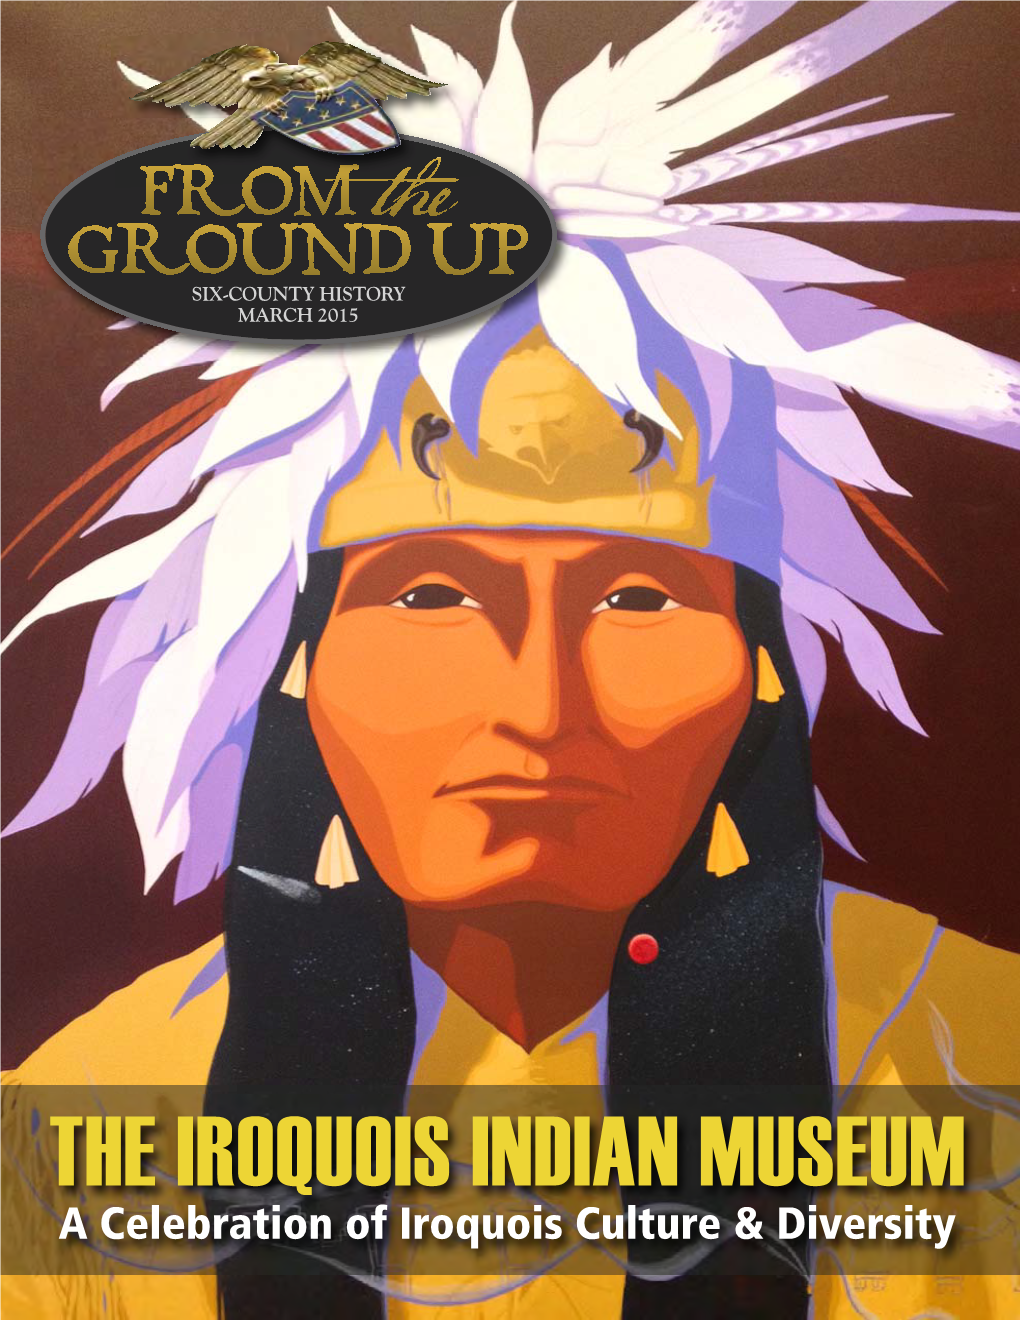 THE IROQUOIS INDIAN MUSEUM a Celebration of Iroquois Culture & Diversity 1200 Cans of Beer on the Wall by Chris Altmann